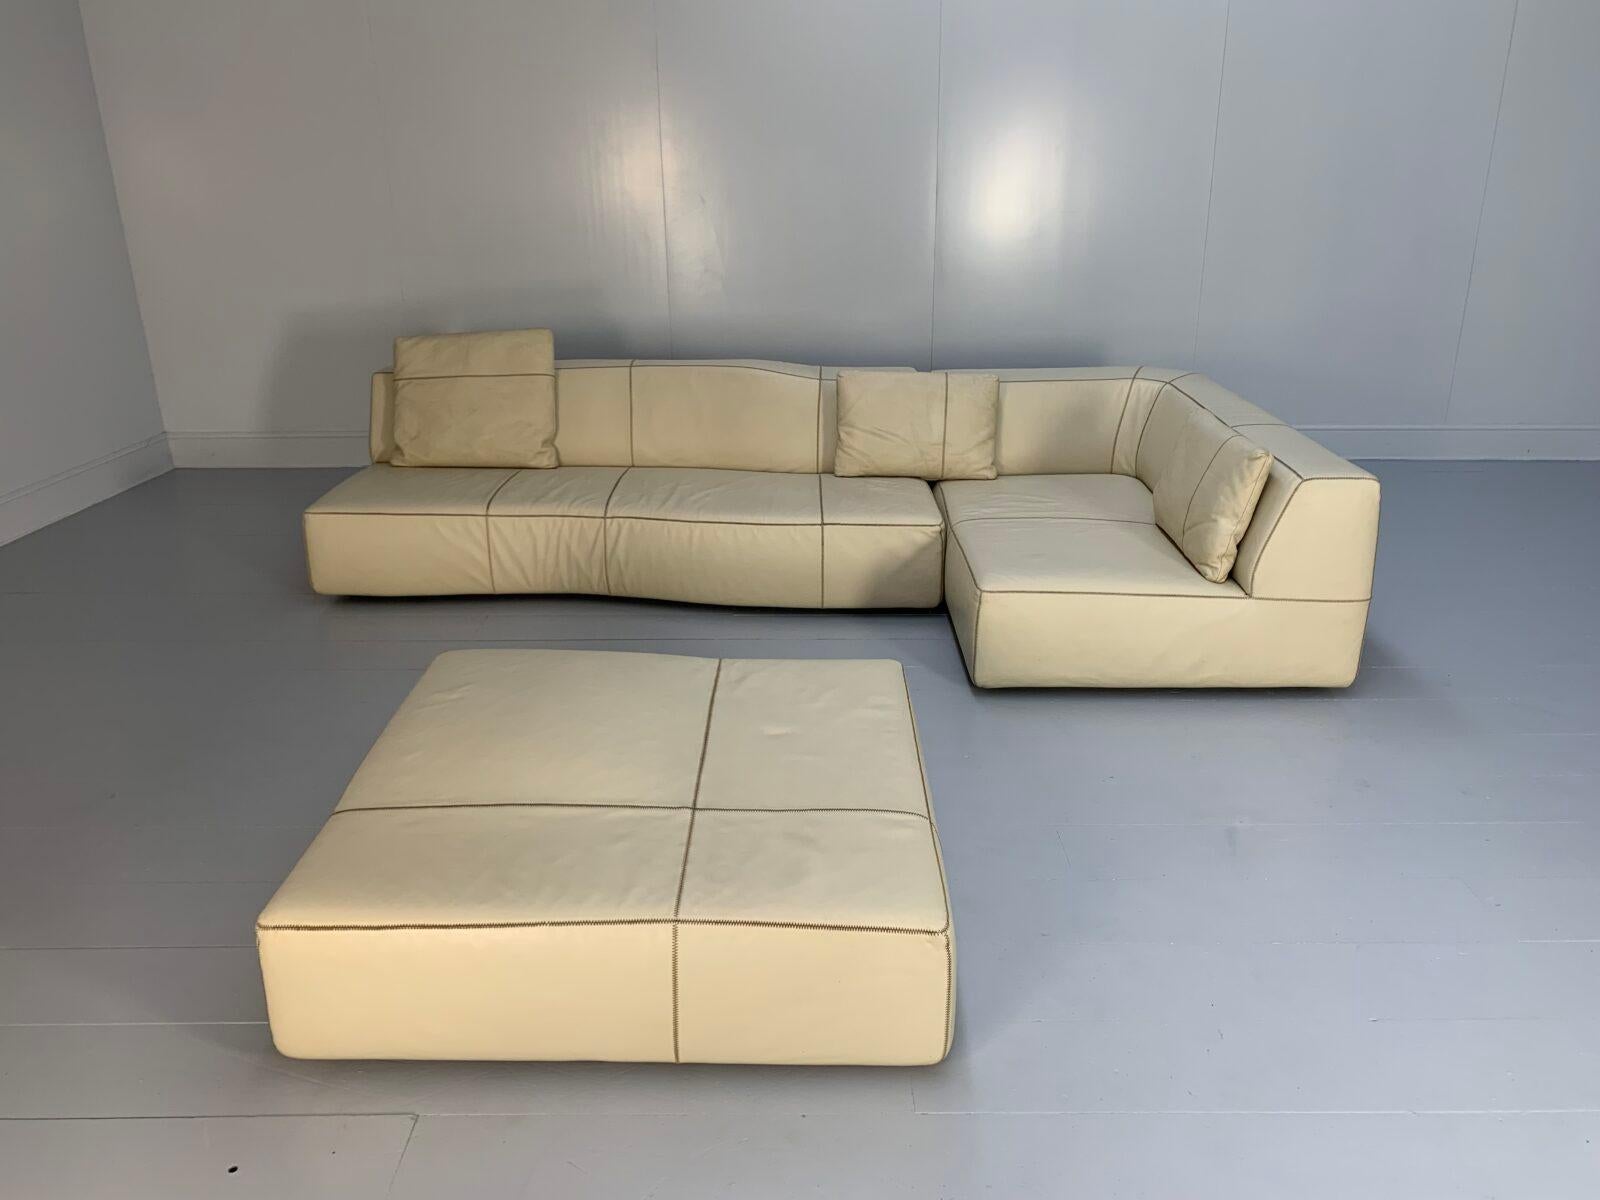 On offer on this occasion is superb, original icon of contemporary seating-design, it being a  